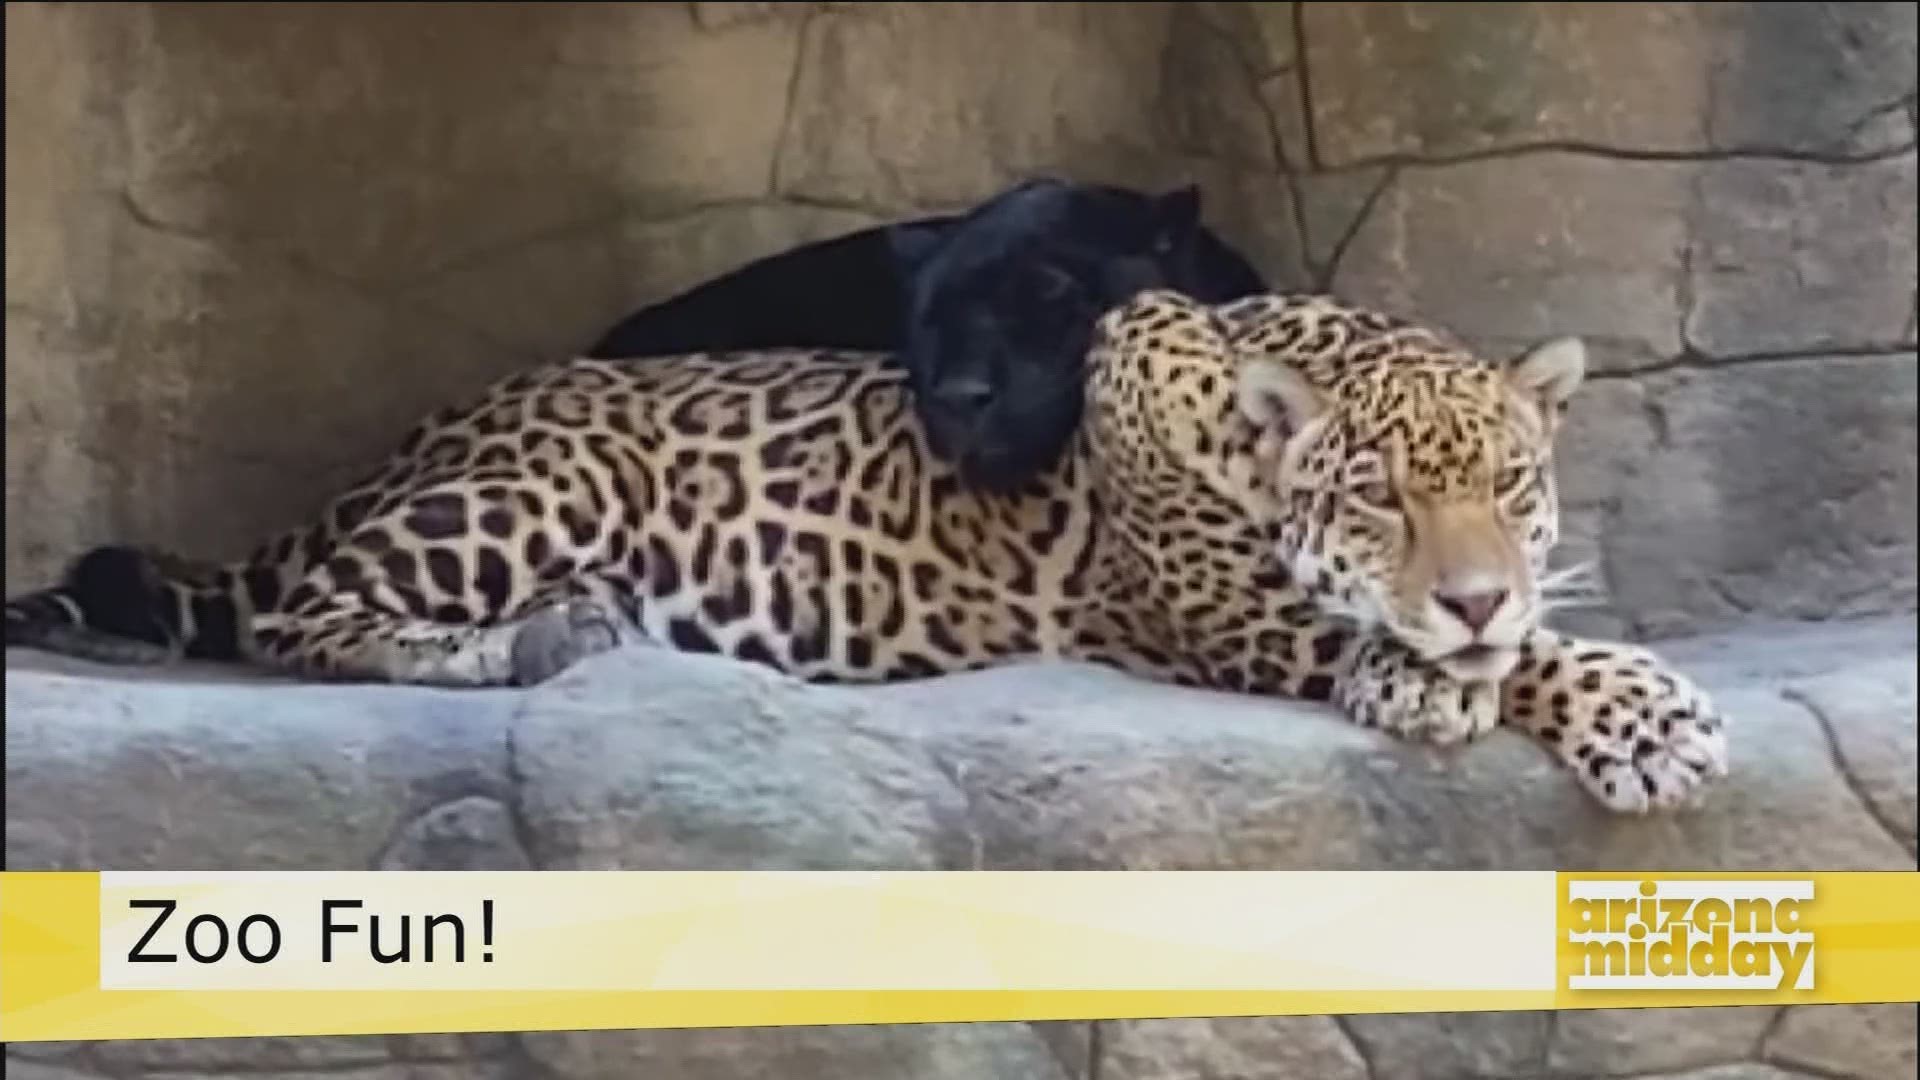 Kristy Morcom, with the Wildlife World Zoo & Aquarium, tells us all about their jaguars.